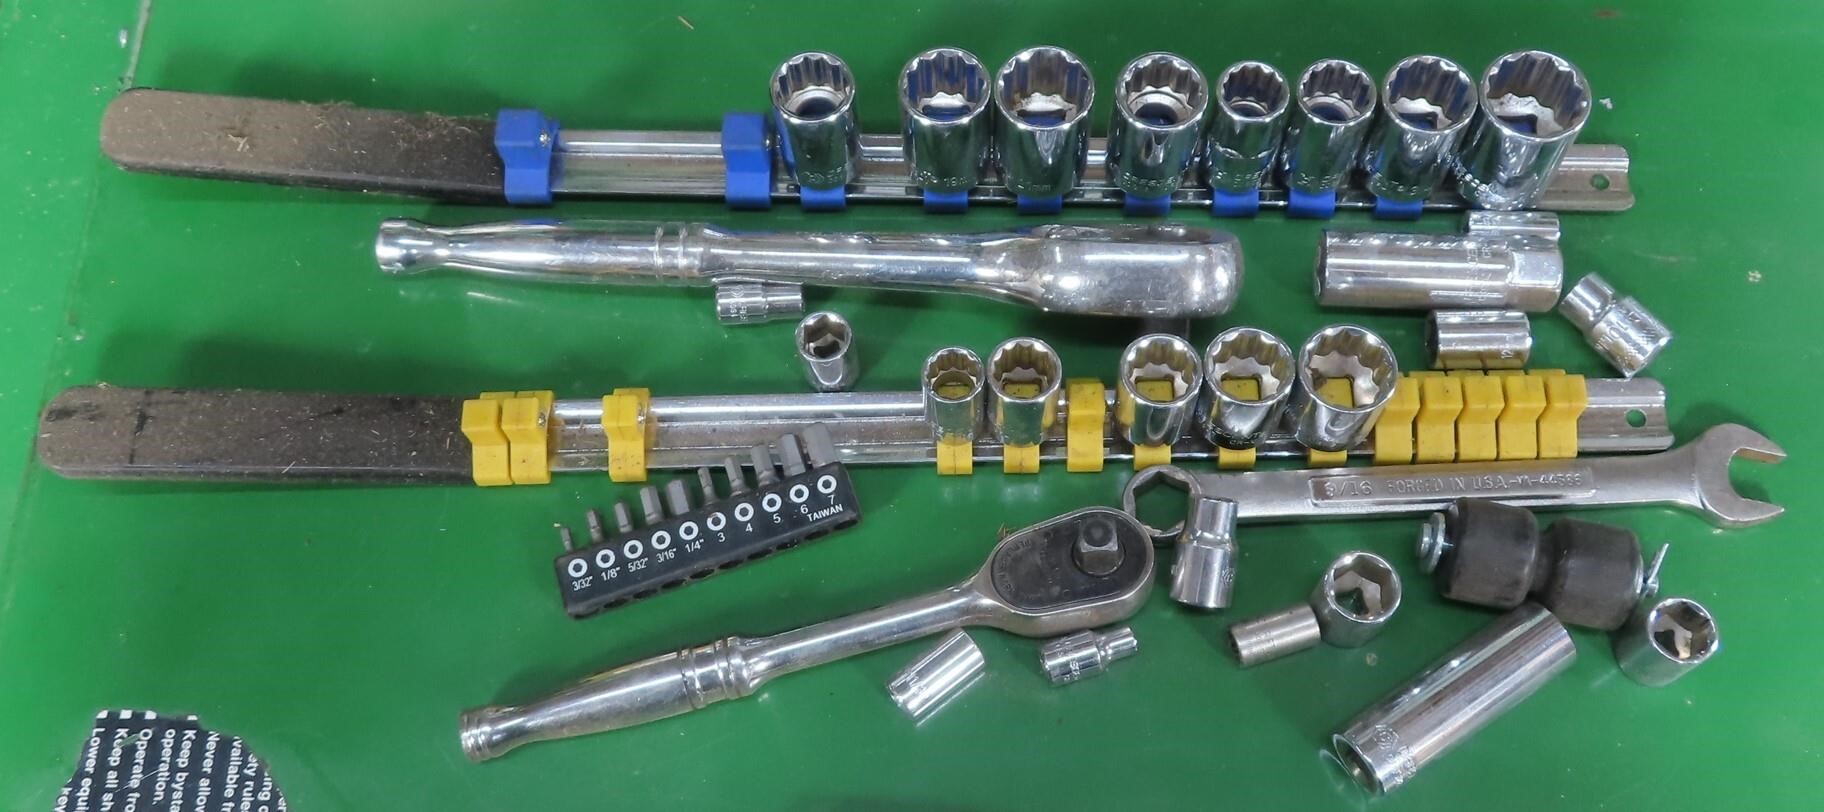 Snap-On, Craftsman and Crescent Tools